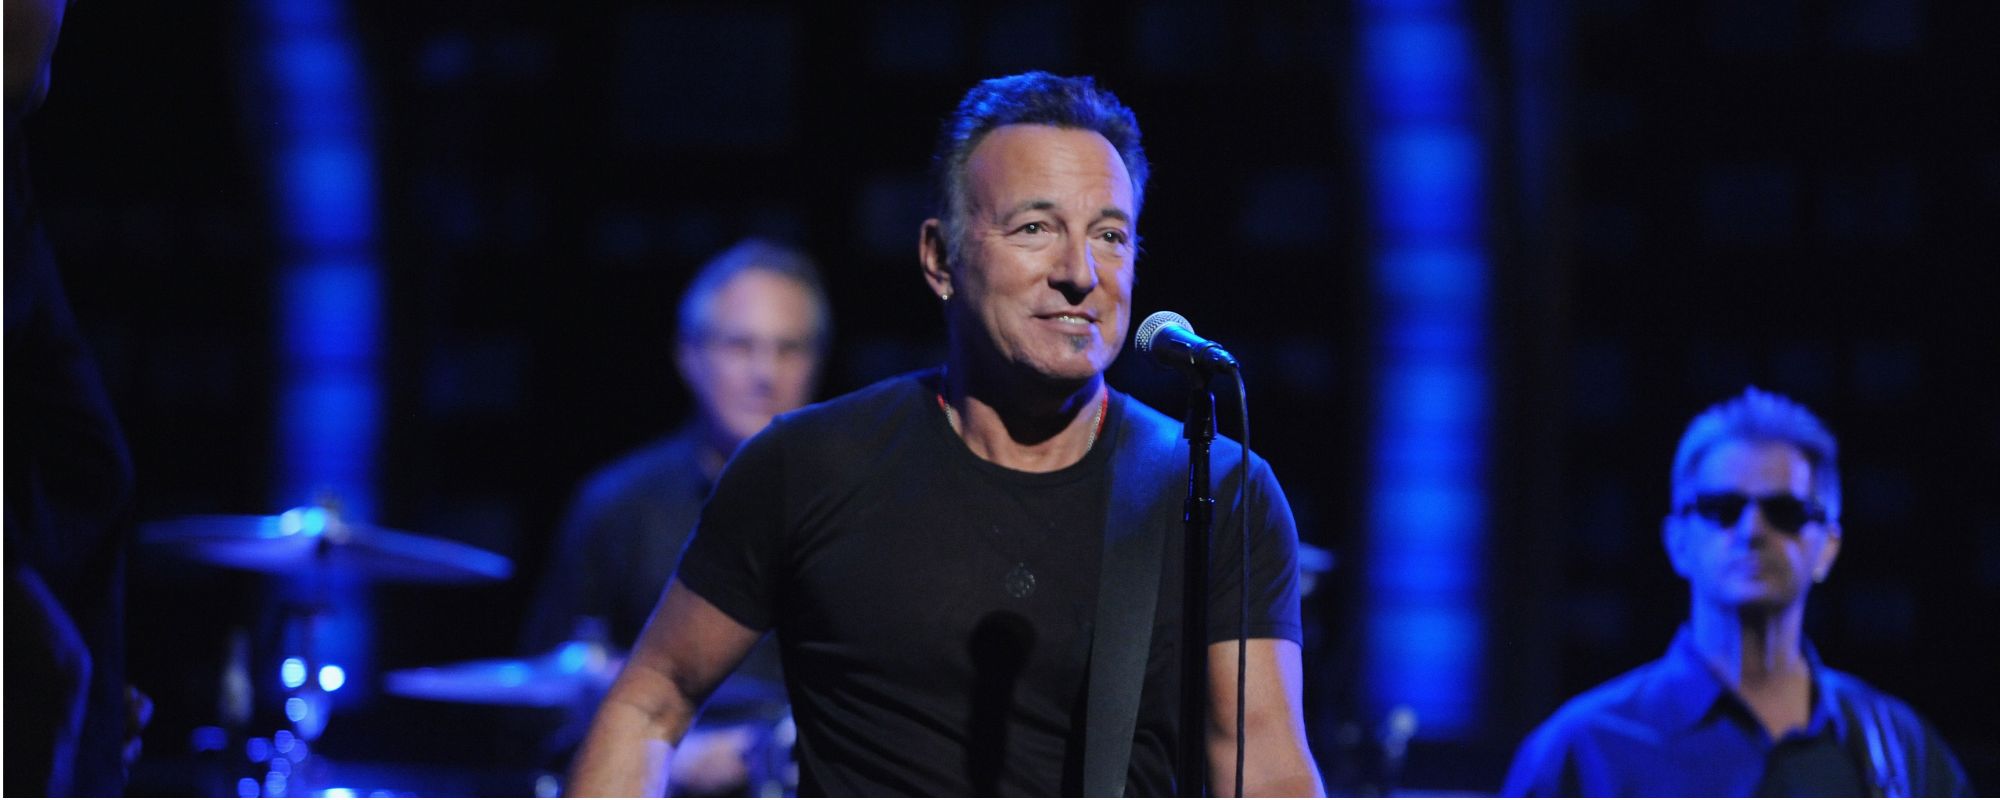 Bruce Springsteen Made Surprise Appearances at Two New Jersey Events Over the Weekend